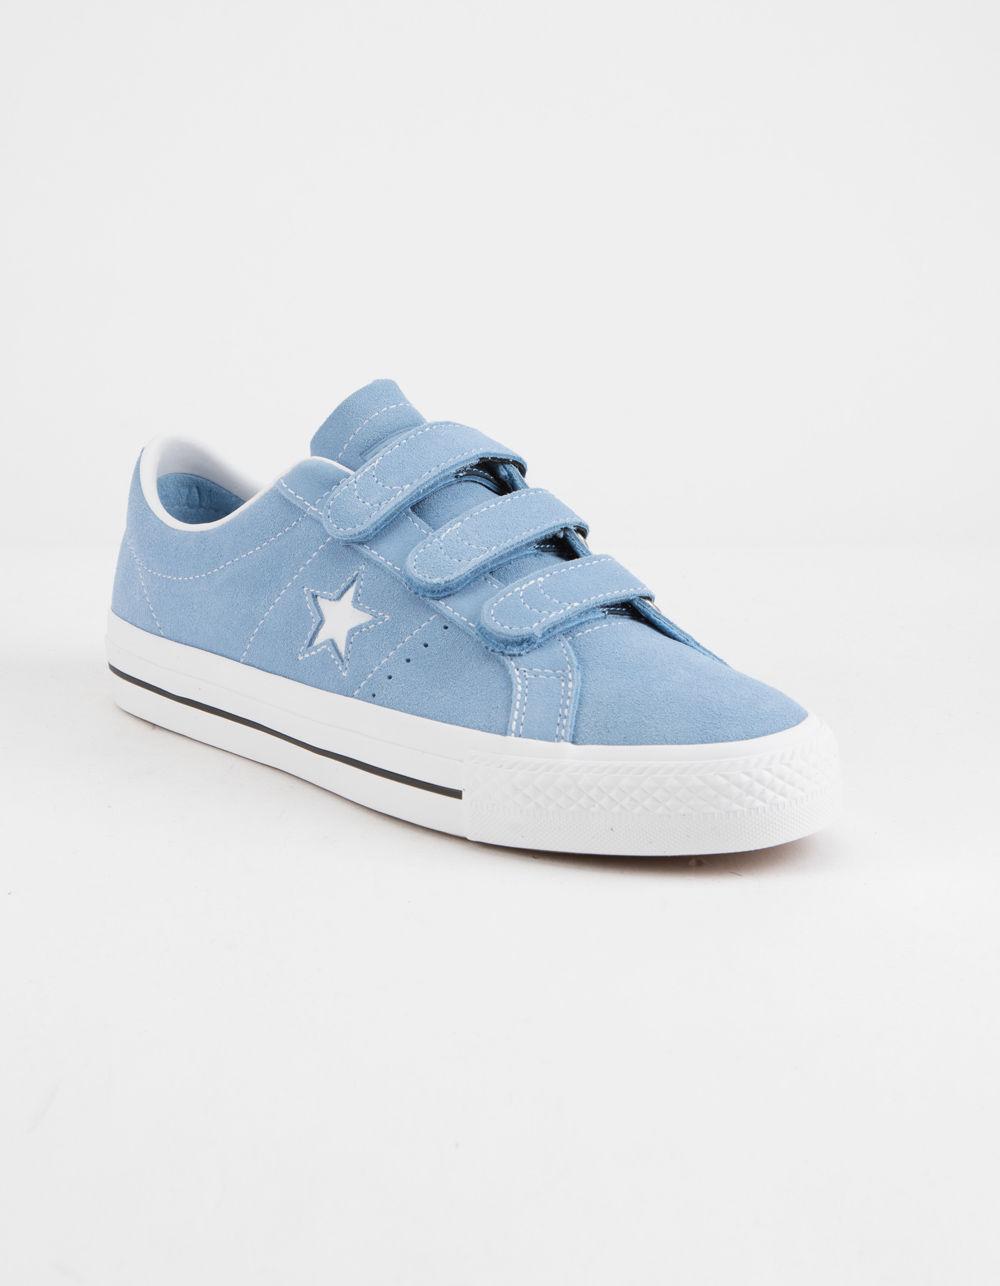 converse one star pro 3v blue, OFF 75 